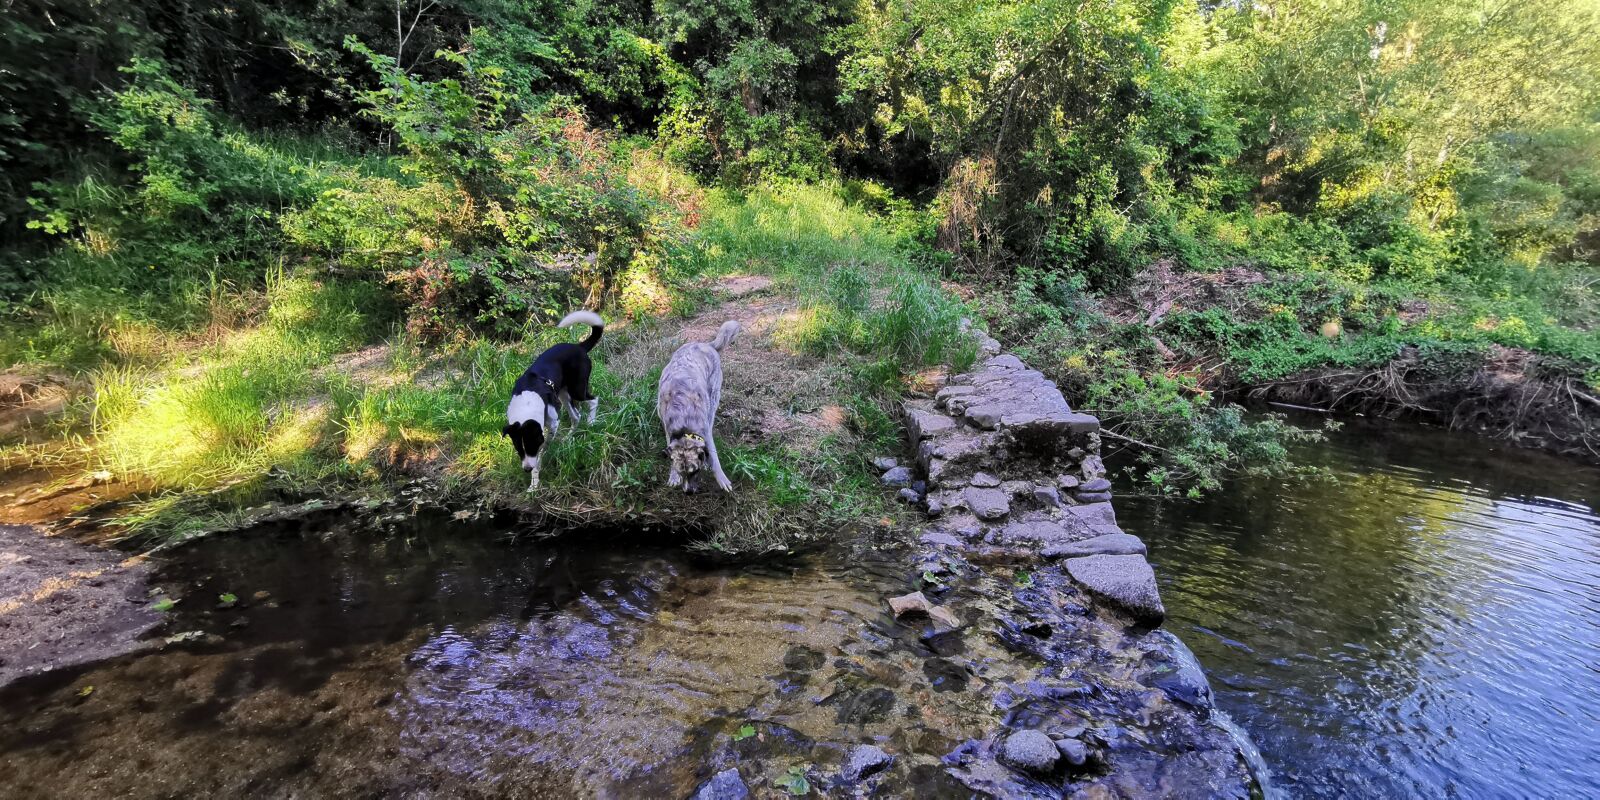 HUAWEI HMA-L29 sample photo. Dogs, water, nature photography